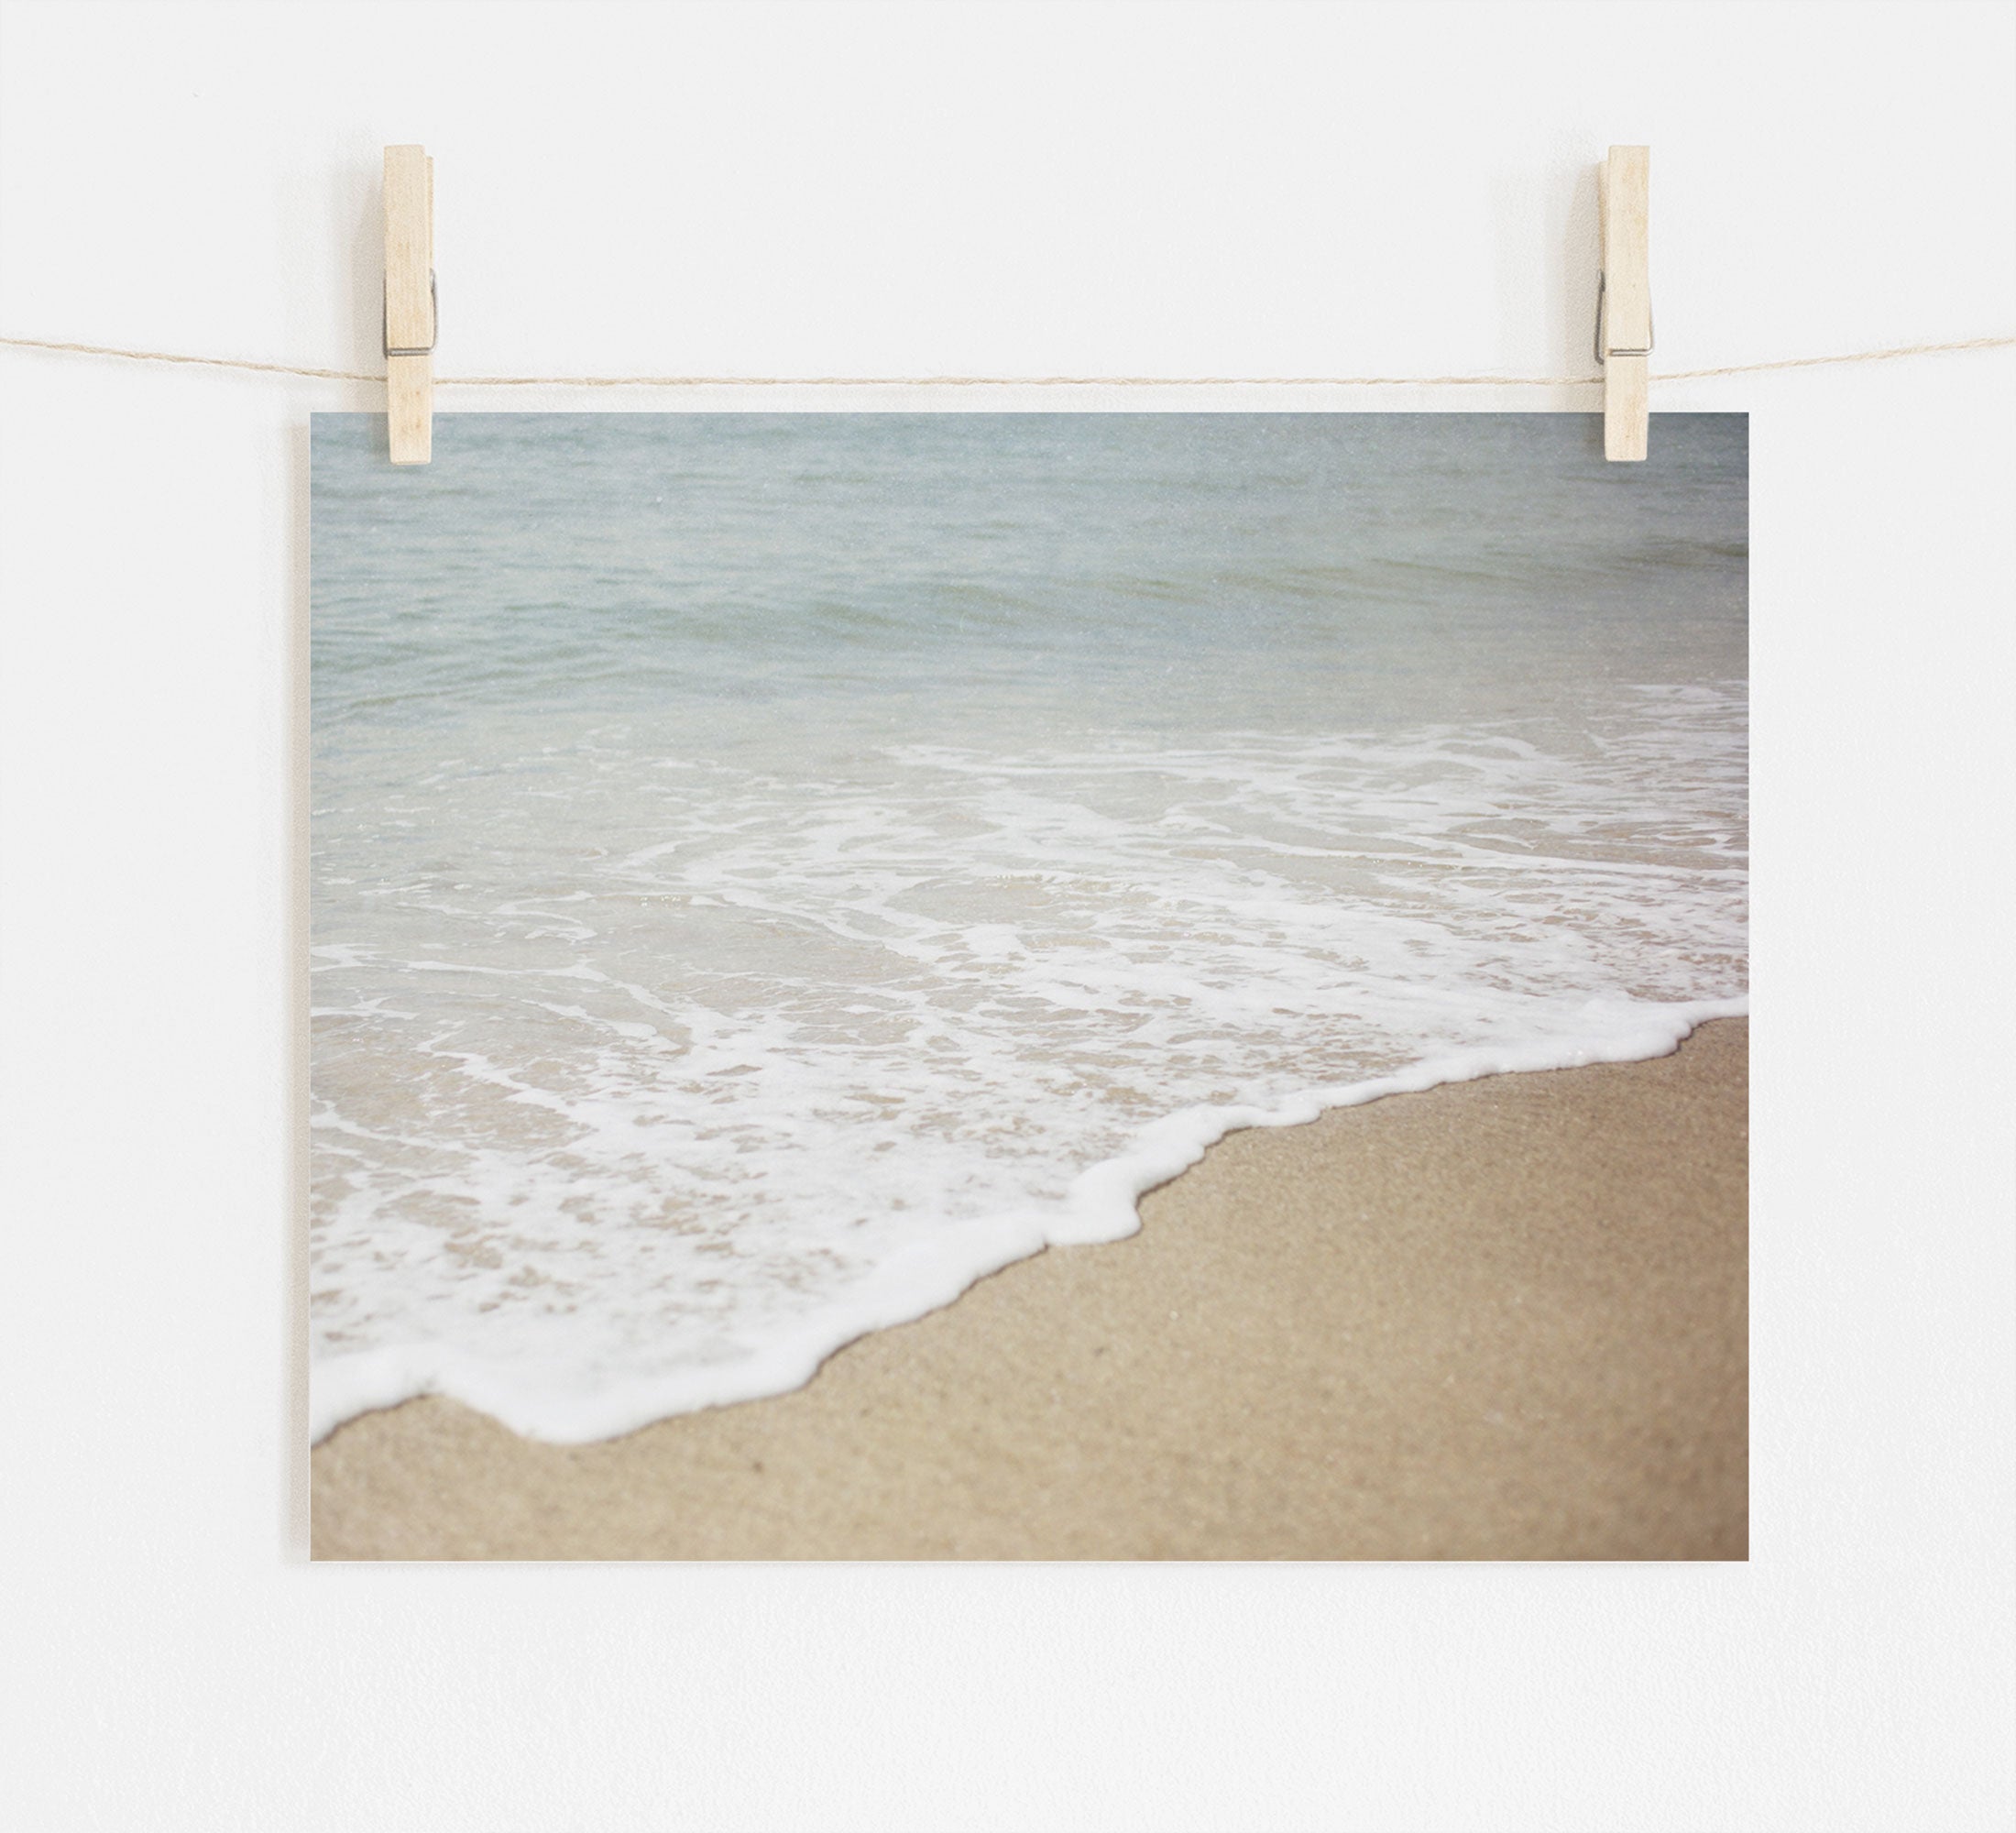 A photograph of a Beach Waves Print, 'Chasing Surf' by Offley Green, printed on archival photographic paper and pinned up by two wooden clothespins on a string against a white background.